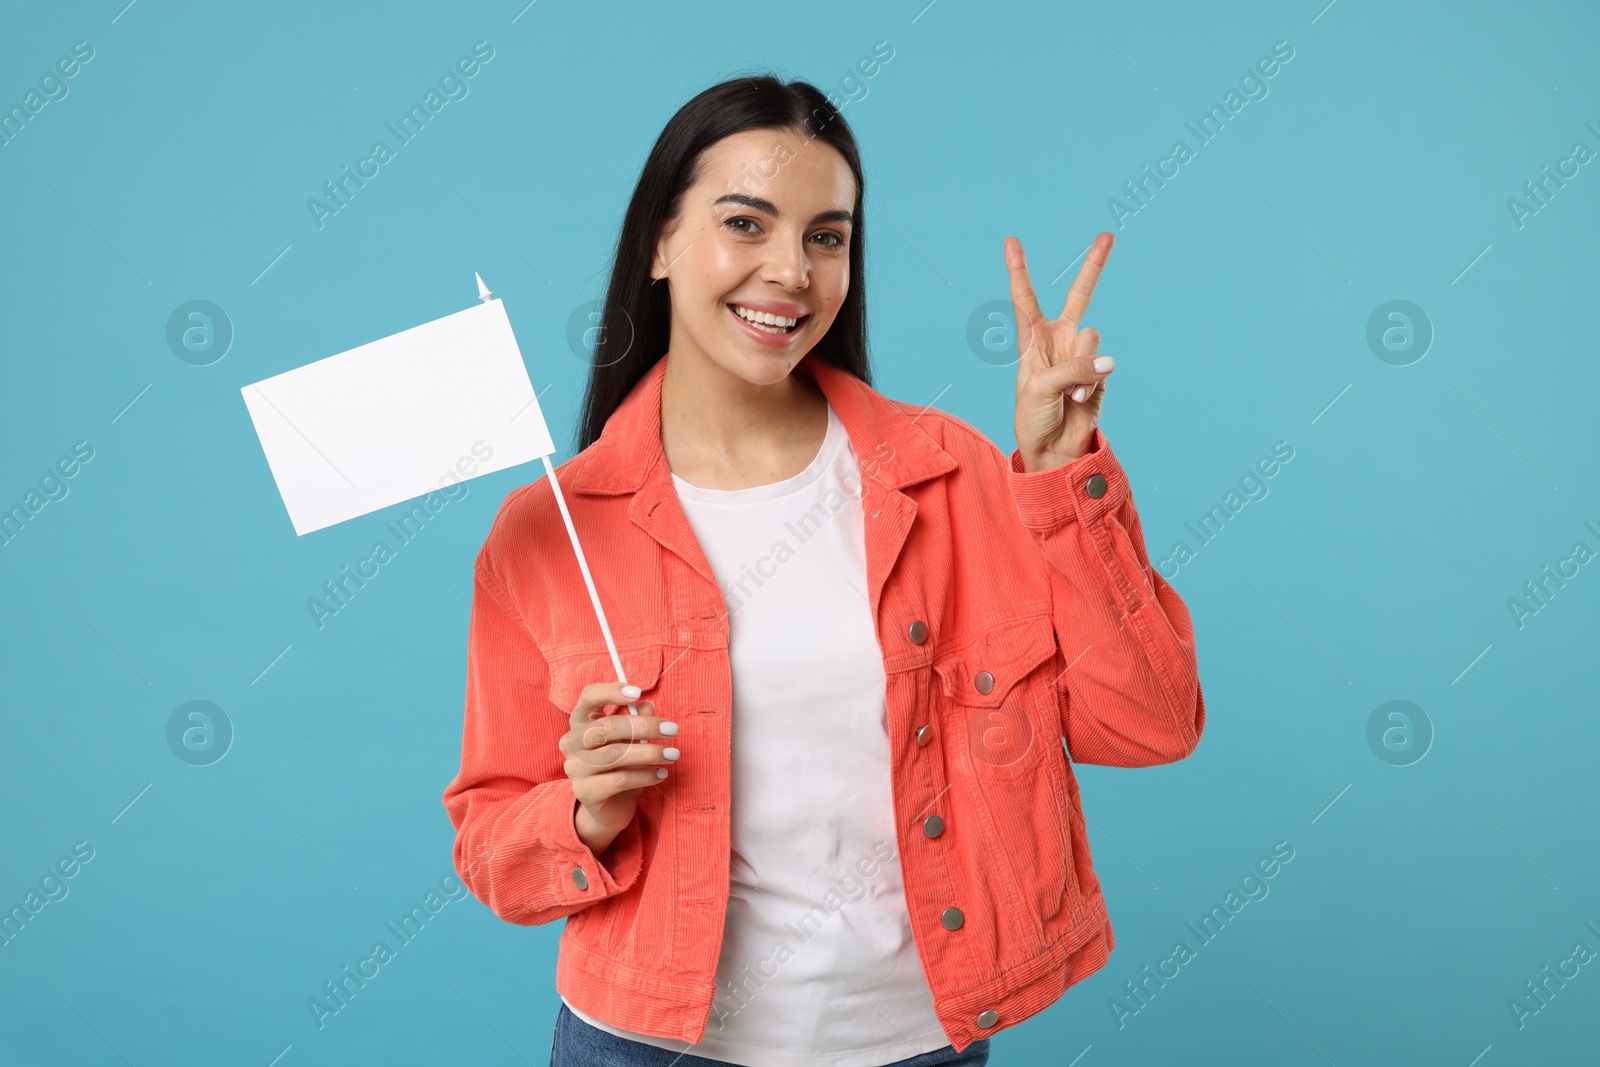 Photo of Happy young woman with blank white flag showing V-sign on light blue background. Mockup for design